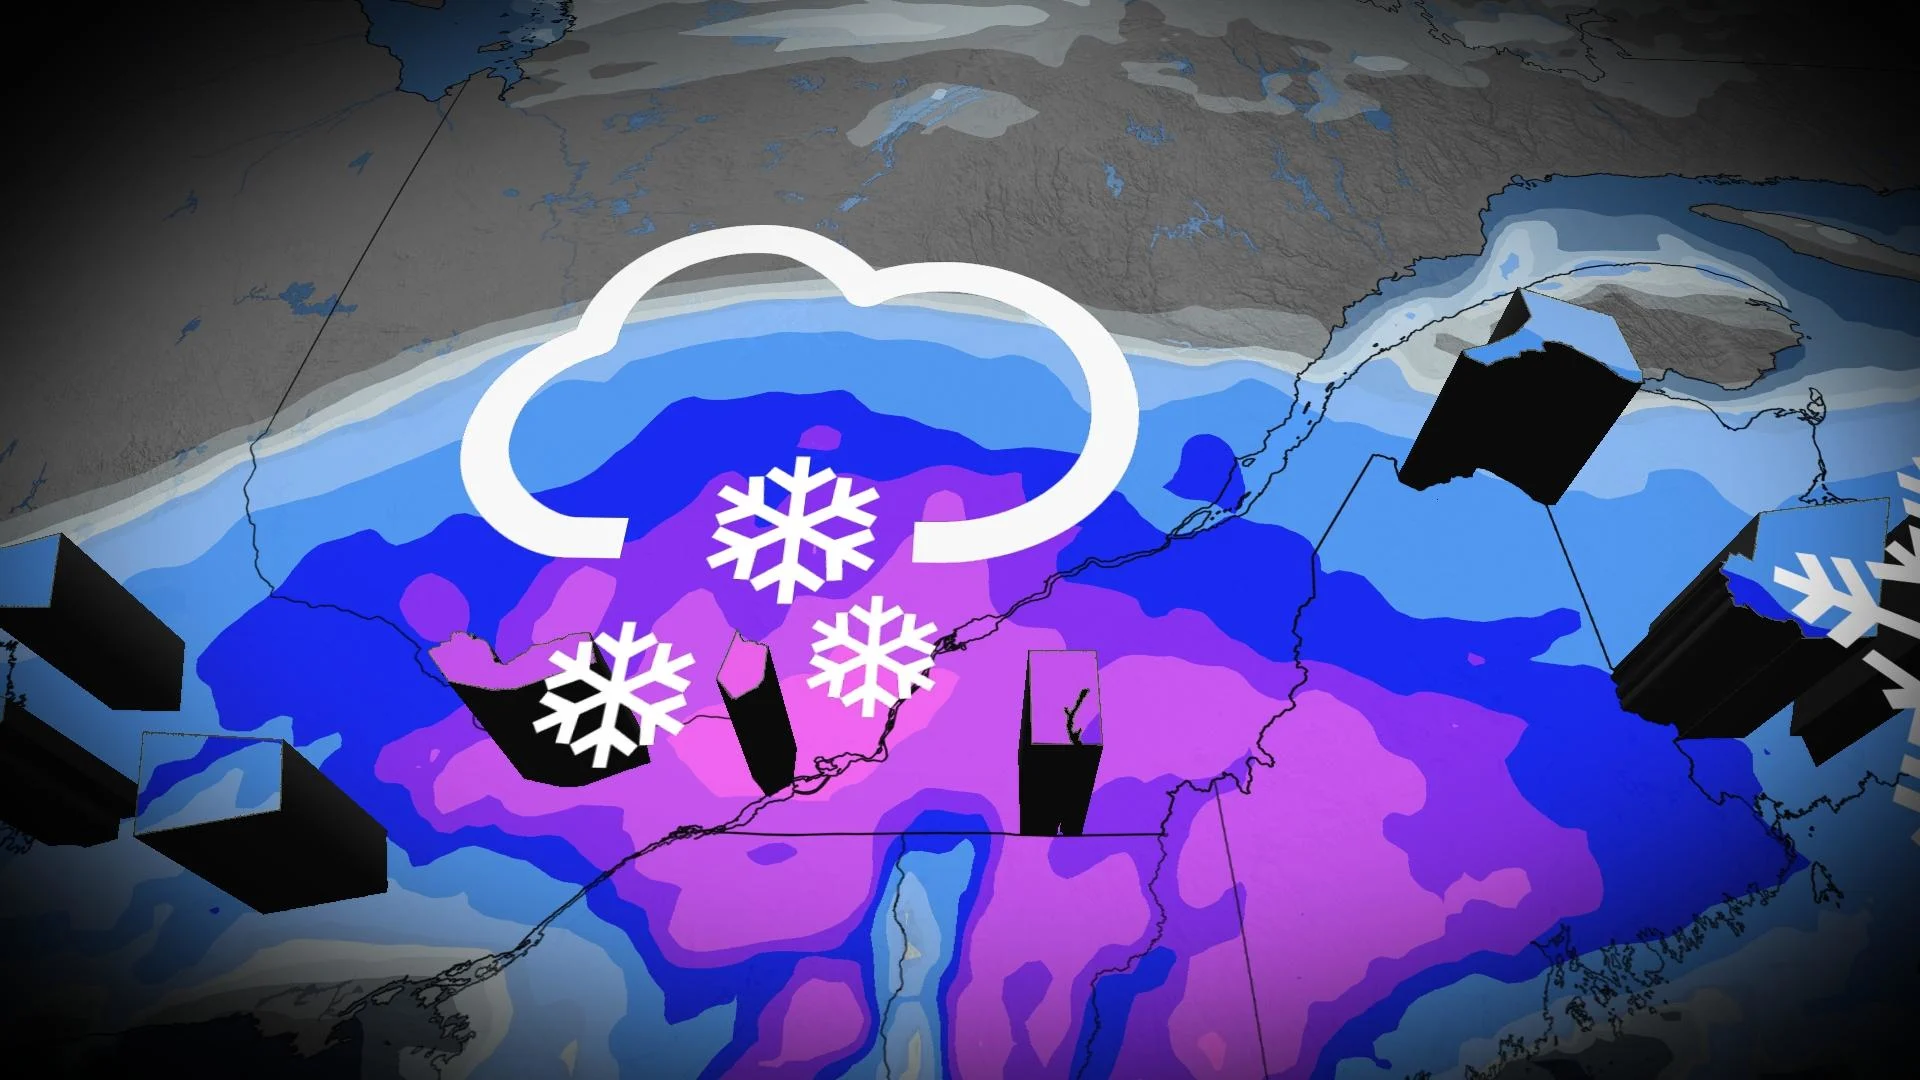 Montreal could see its heaviest snowfall of the season so far